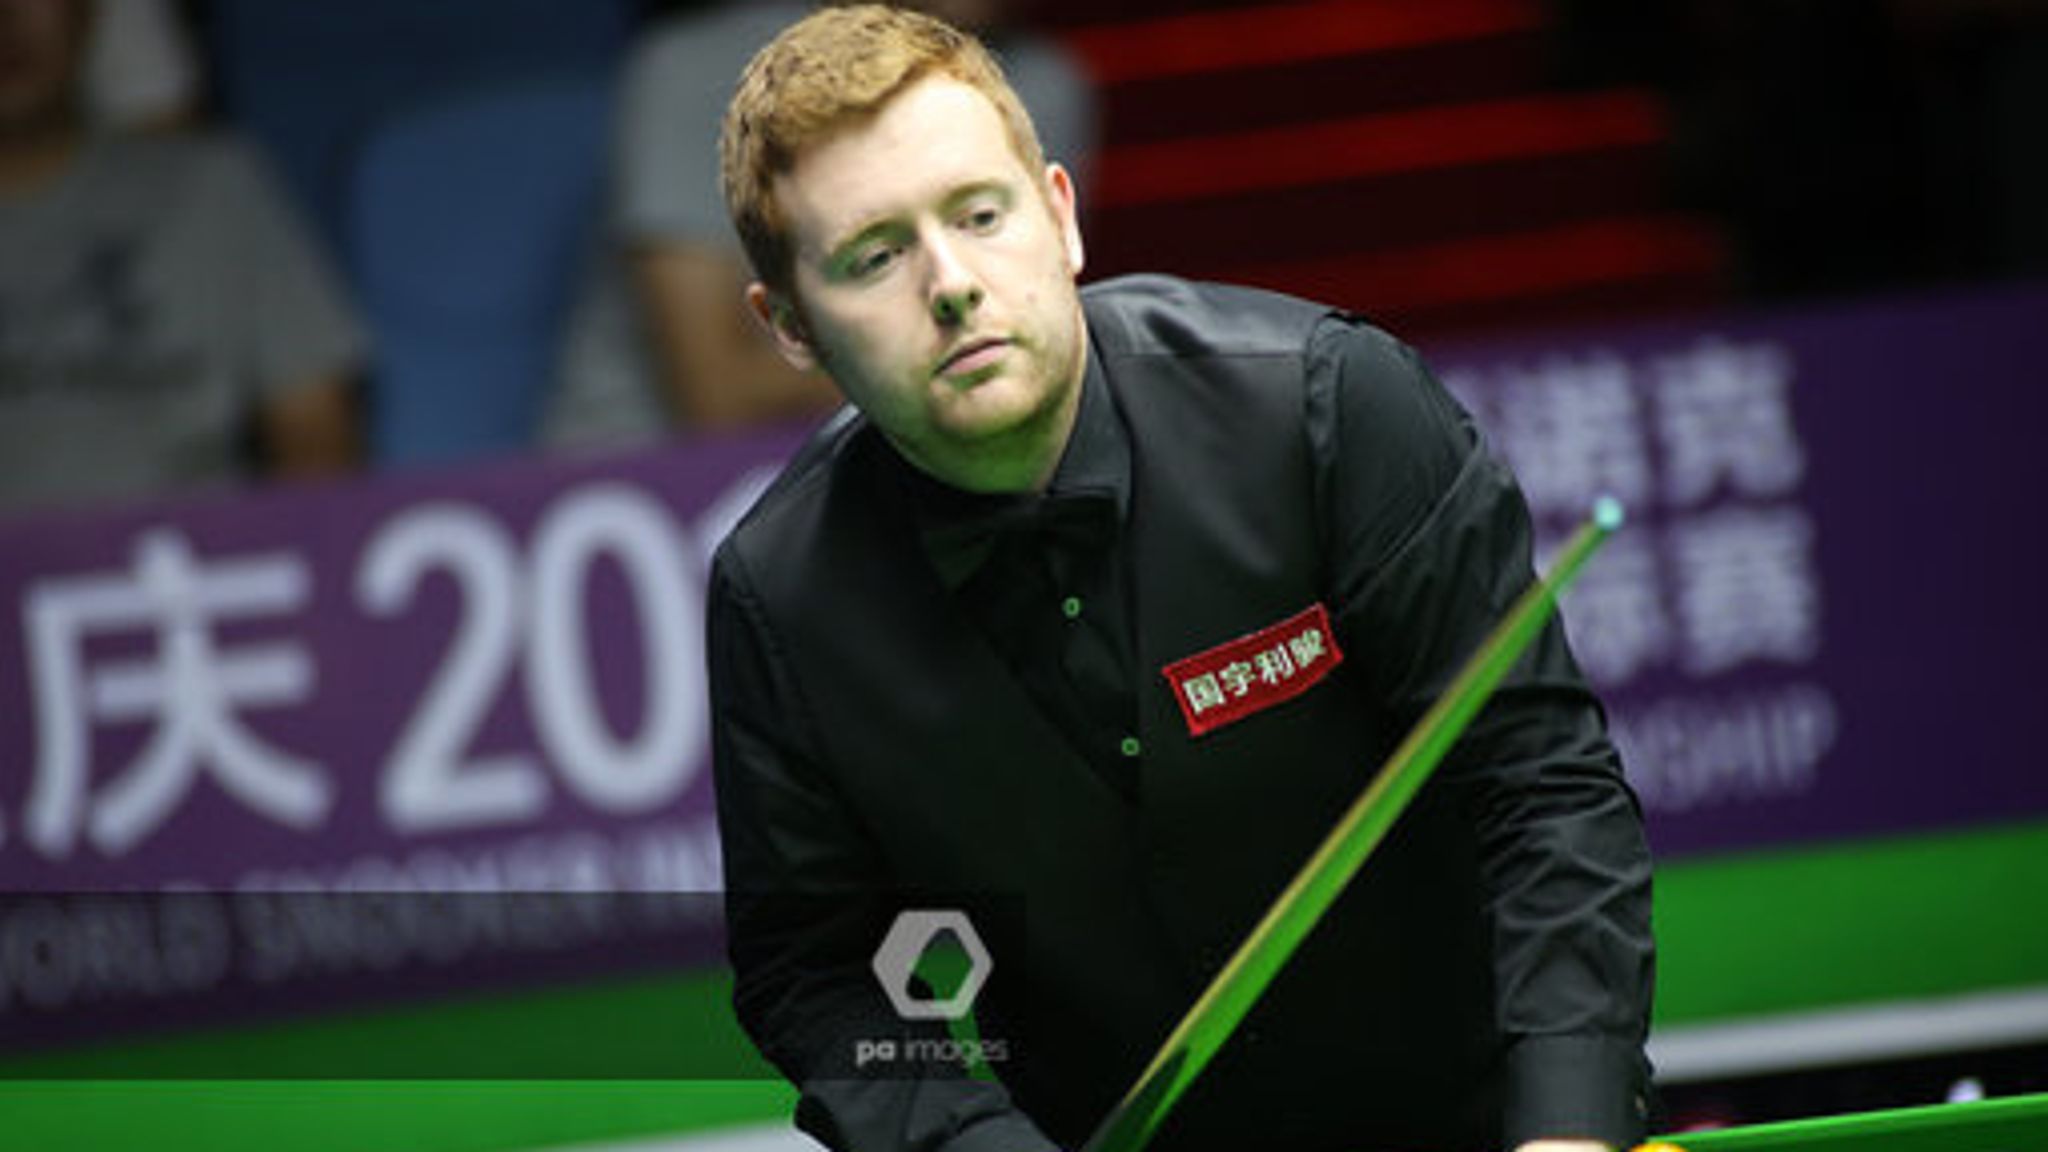 Snooker Championship League Ben Woollaston finds social distancing at event strange Snooker News Sky Sports